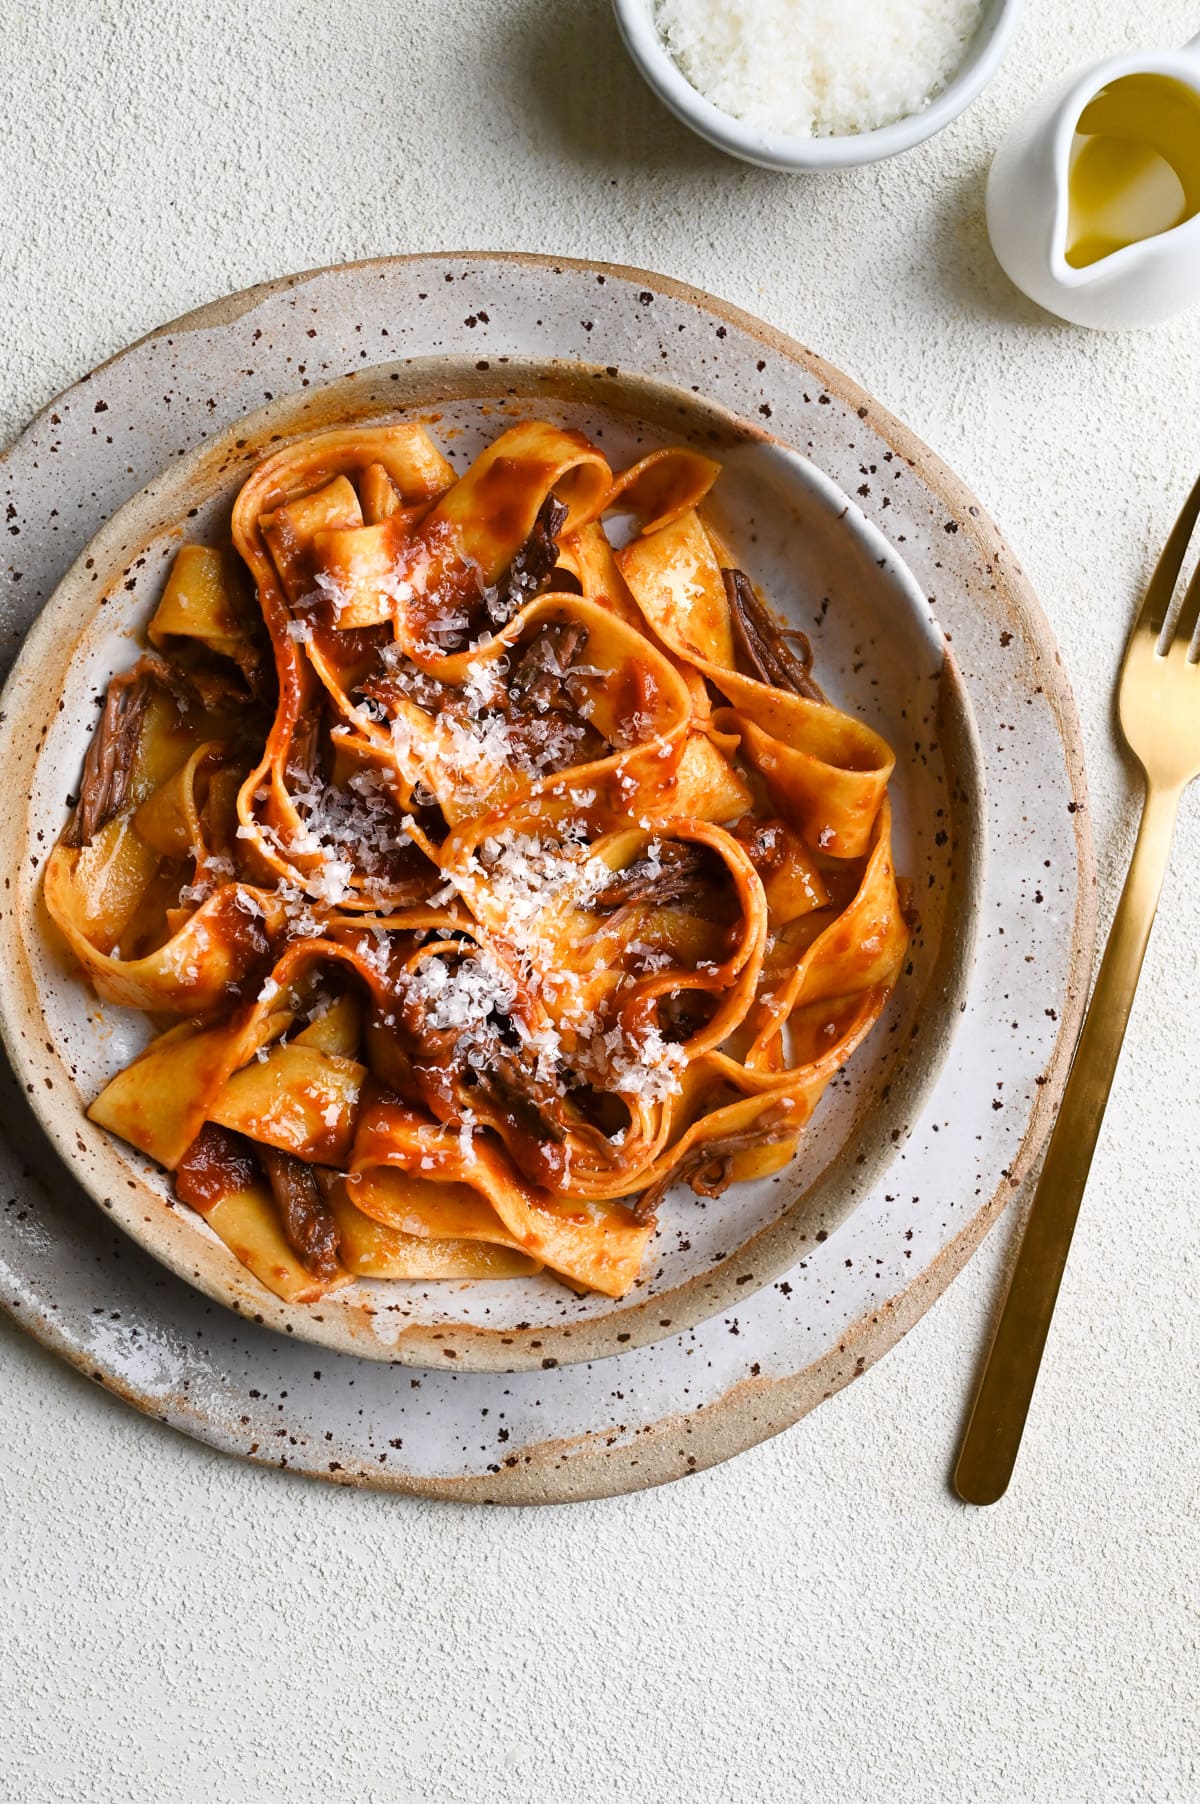 Short Rib Ragu with Pappardelle Pasta topped with parmesan on a textured, cream surface.